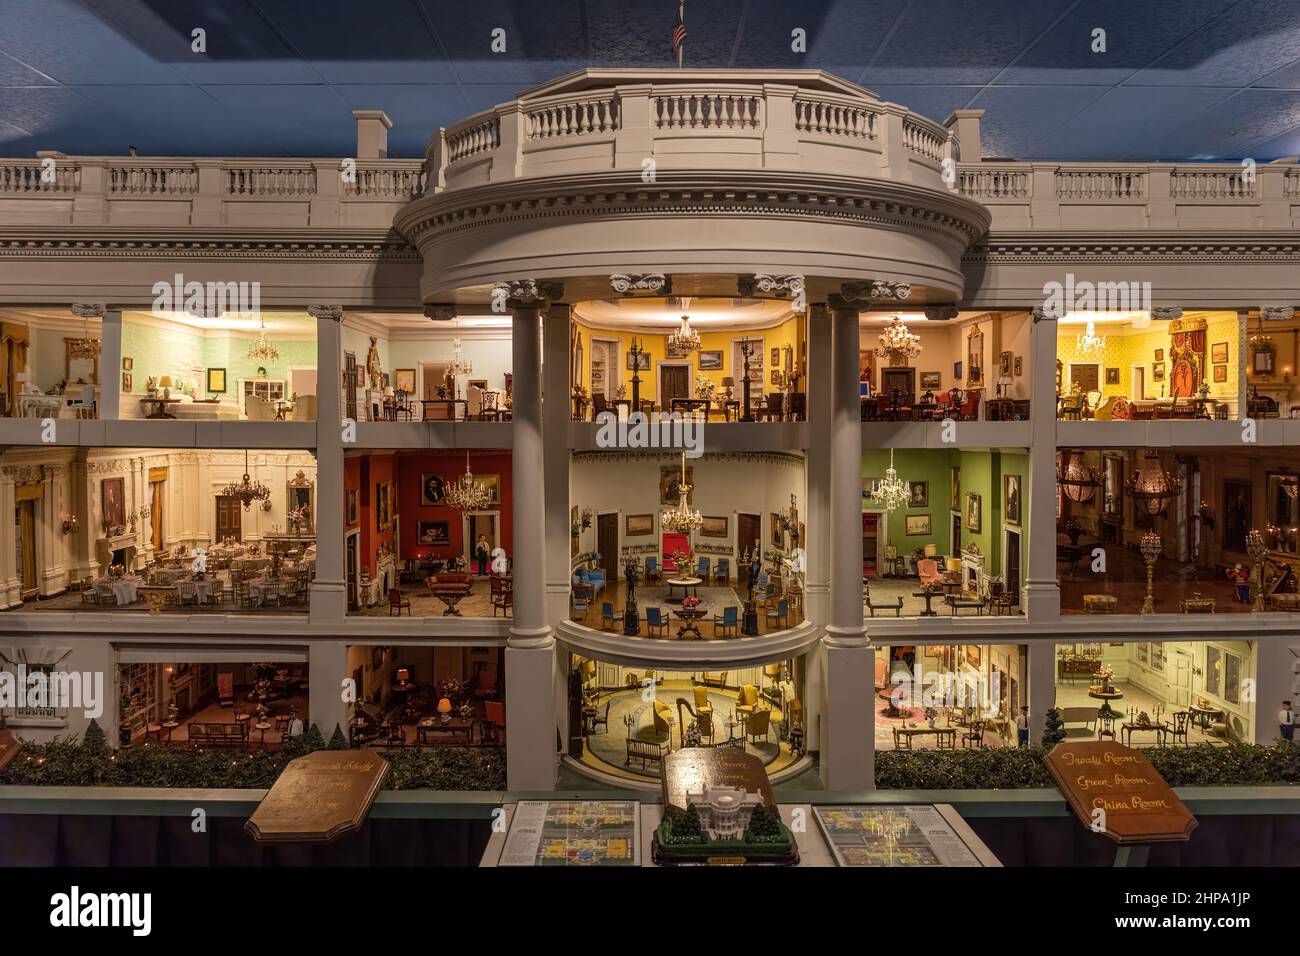 Miniature White House diorama at the President's Hall of Fame - Clermont, Florida, USA Stock Photo